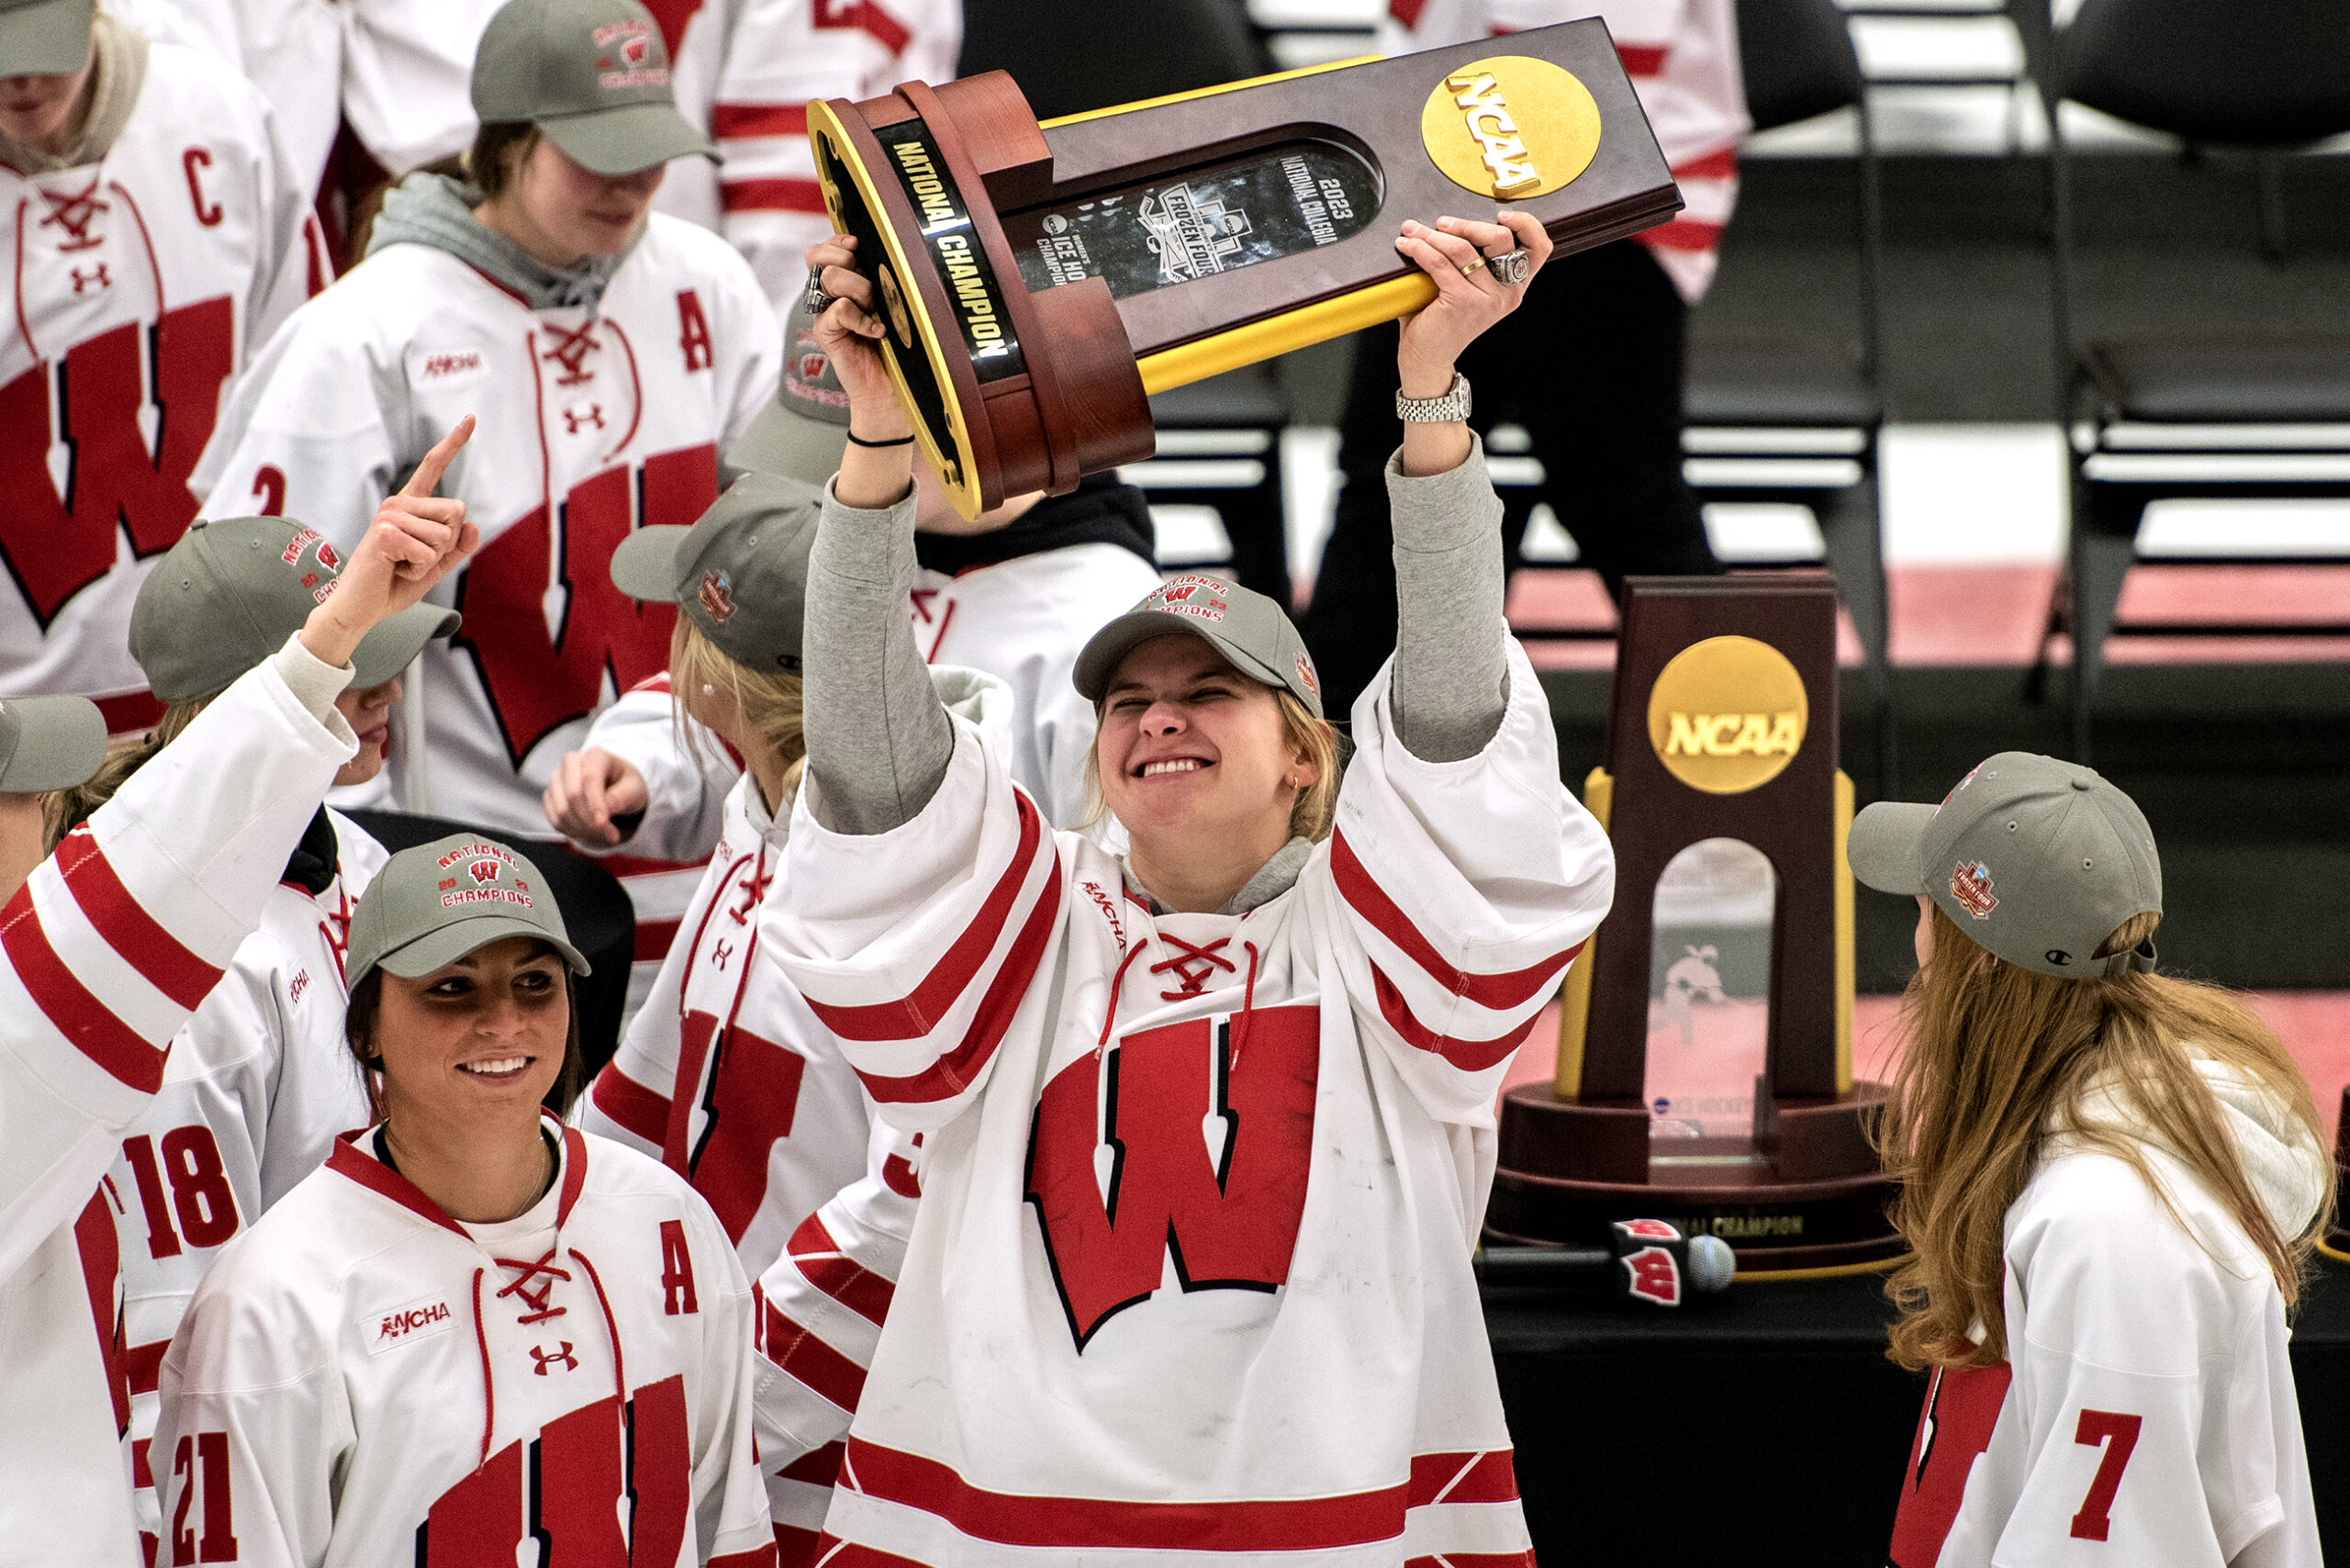 A hockey player in a Wisconsin jersey lifts a wooden trophy with gold details above her head as she smiles.